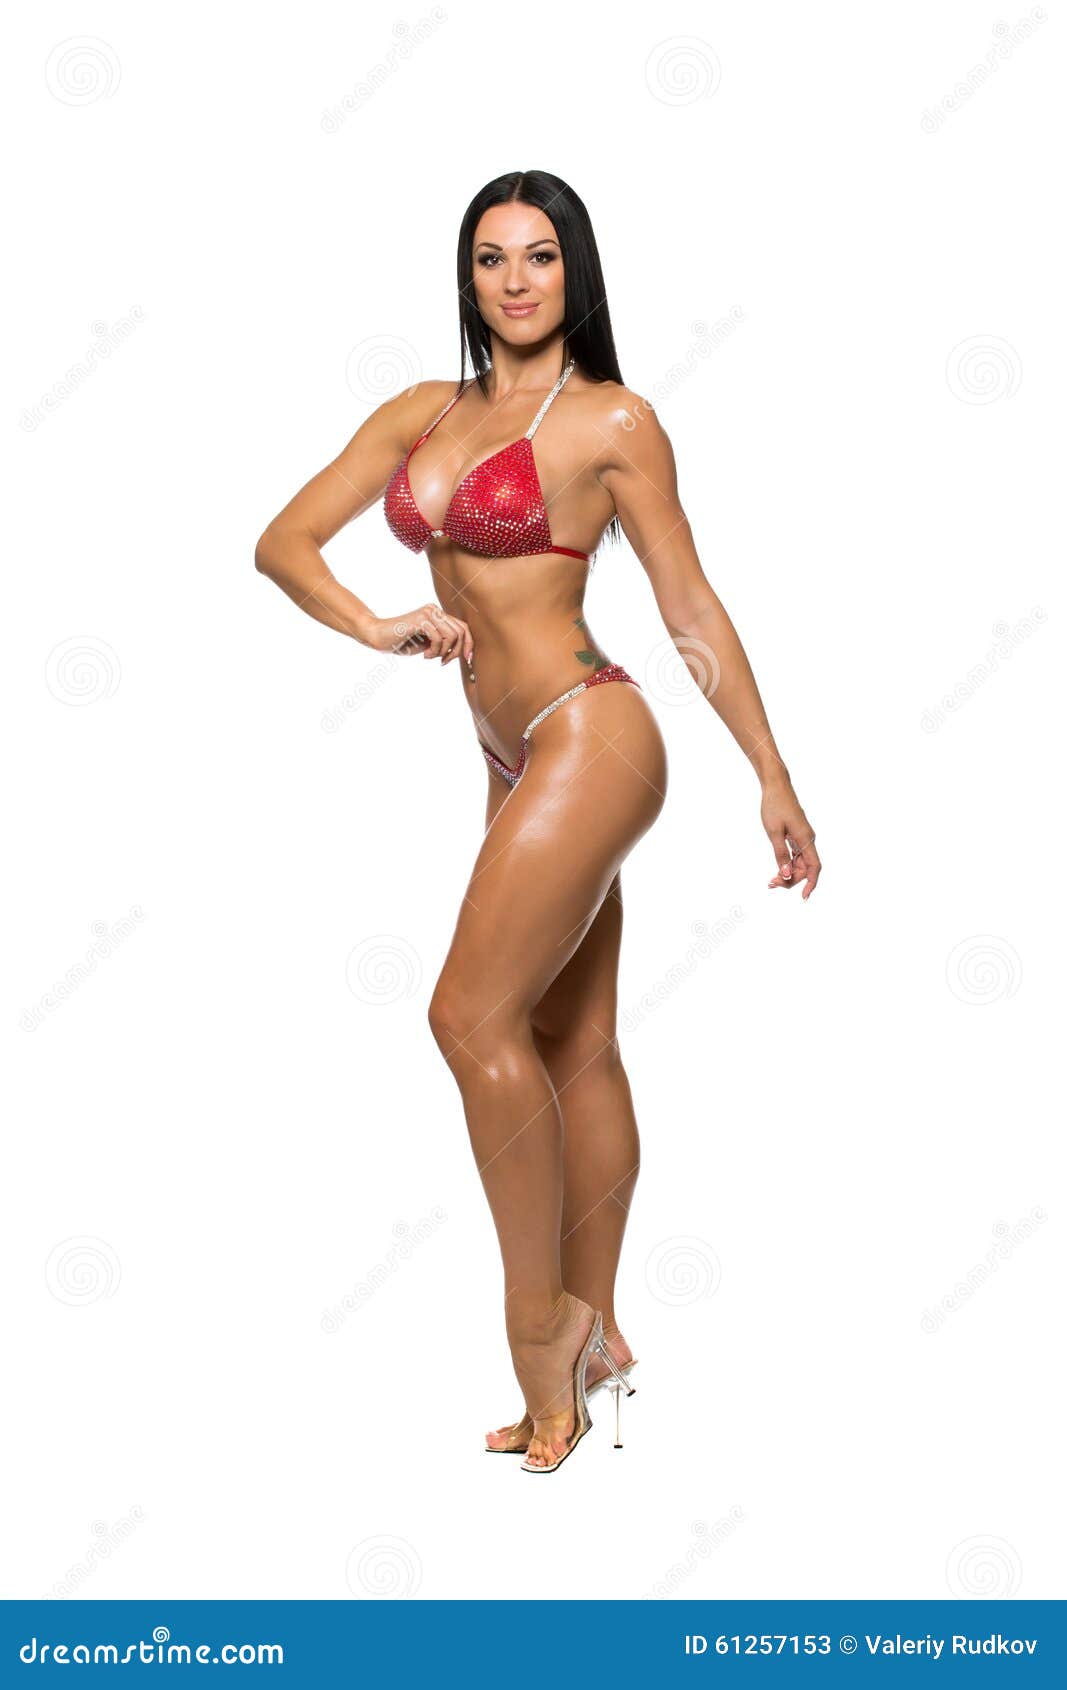 Beautiful Fitness Model In A Red Bikini Stock Image Image Of Concept Skin 61257153